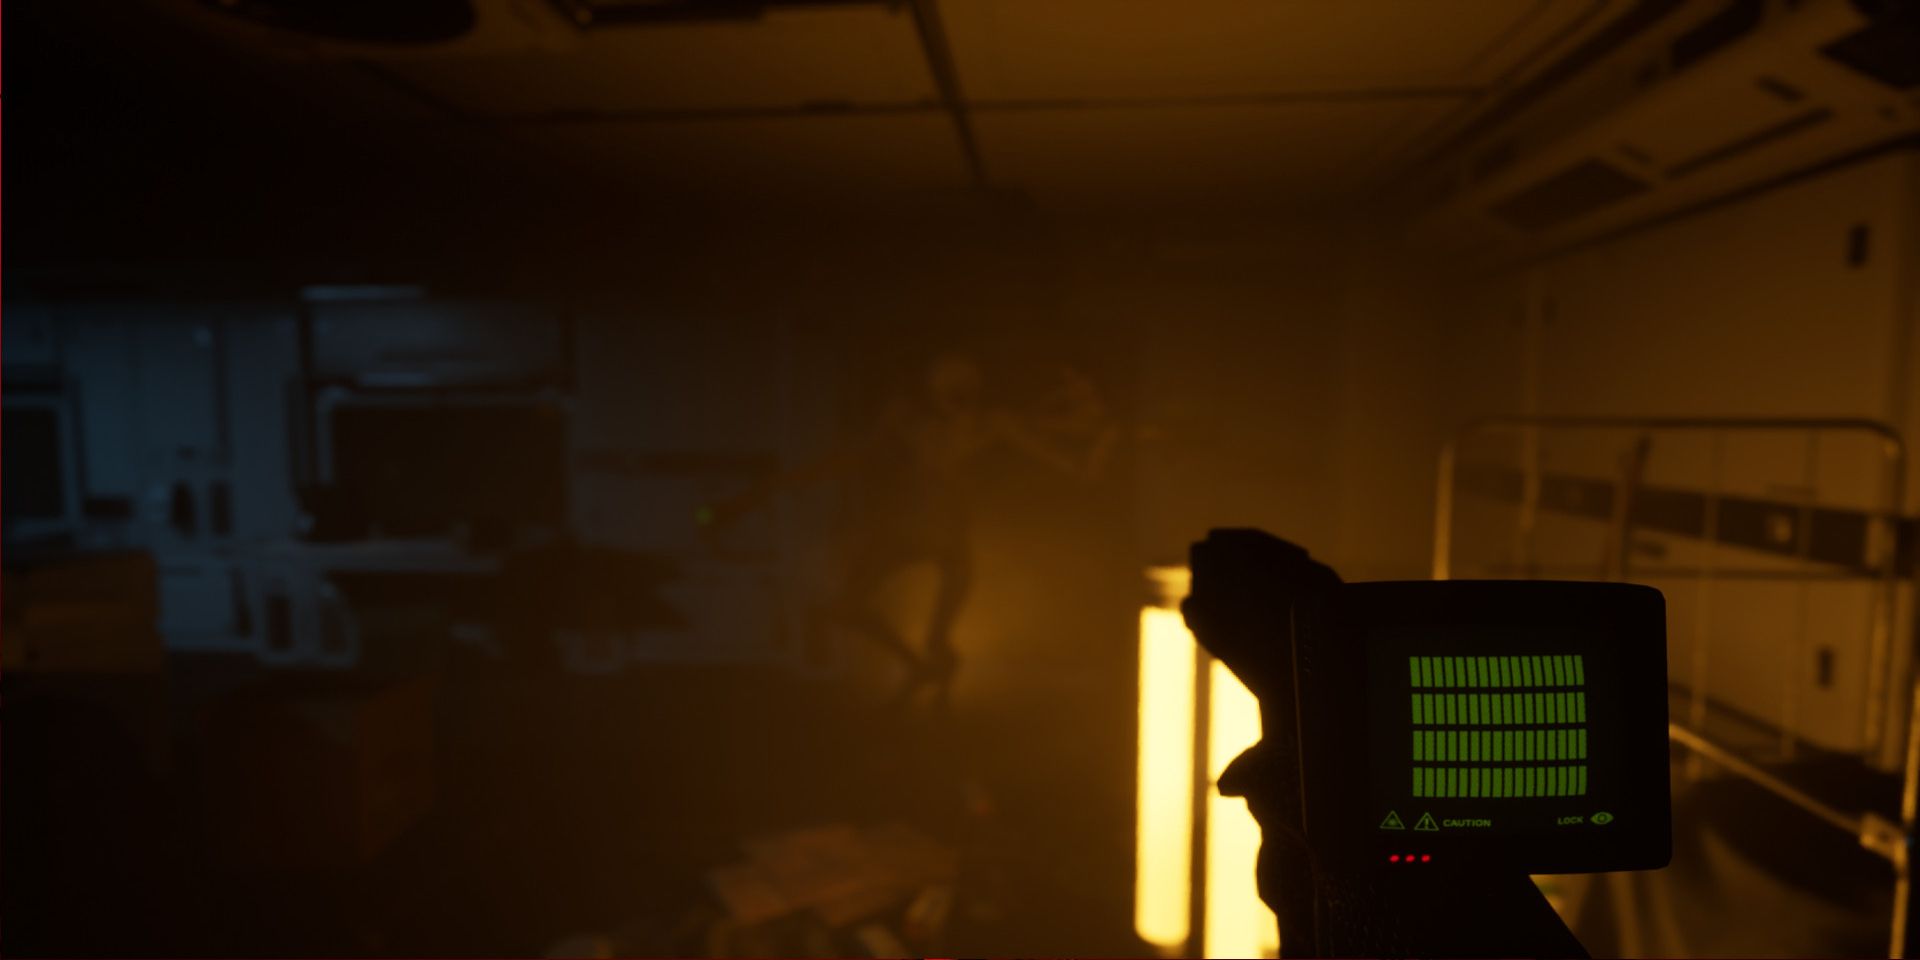 A screenshot of the upcoming multiplayer horror game Level Zero